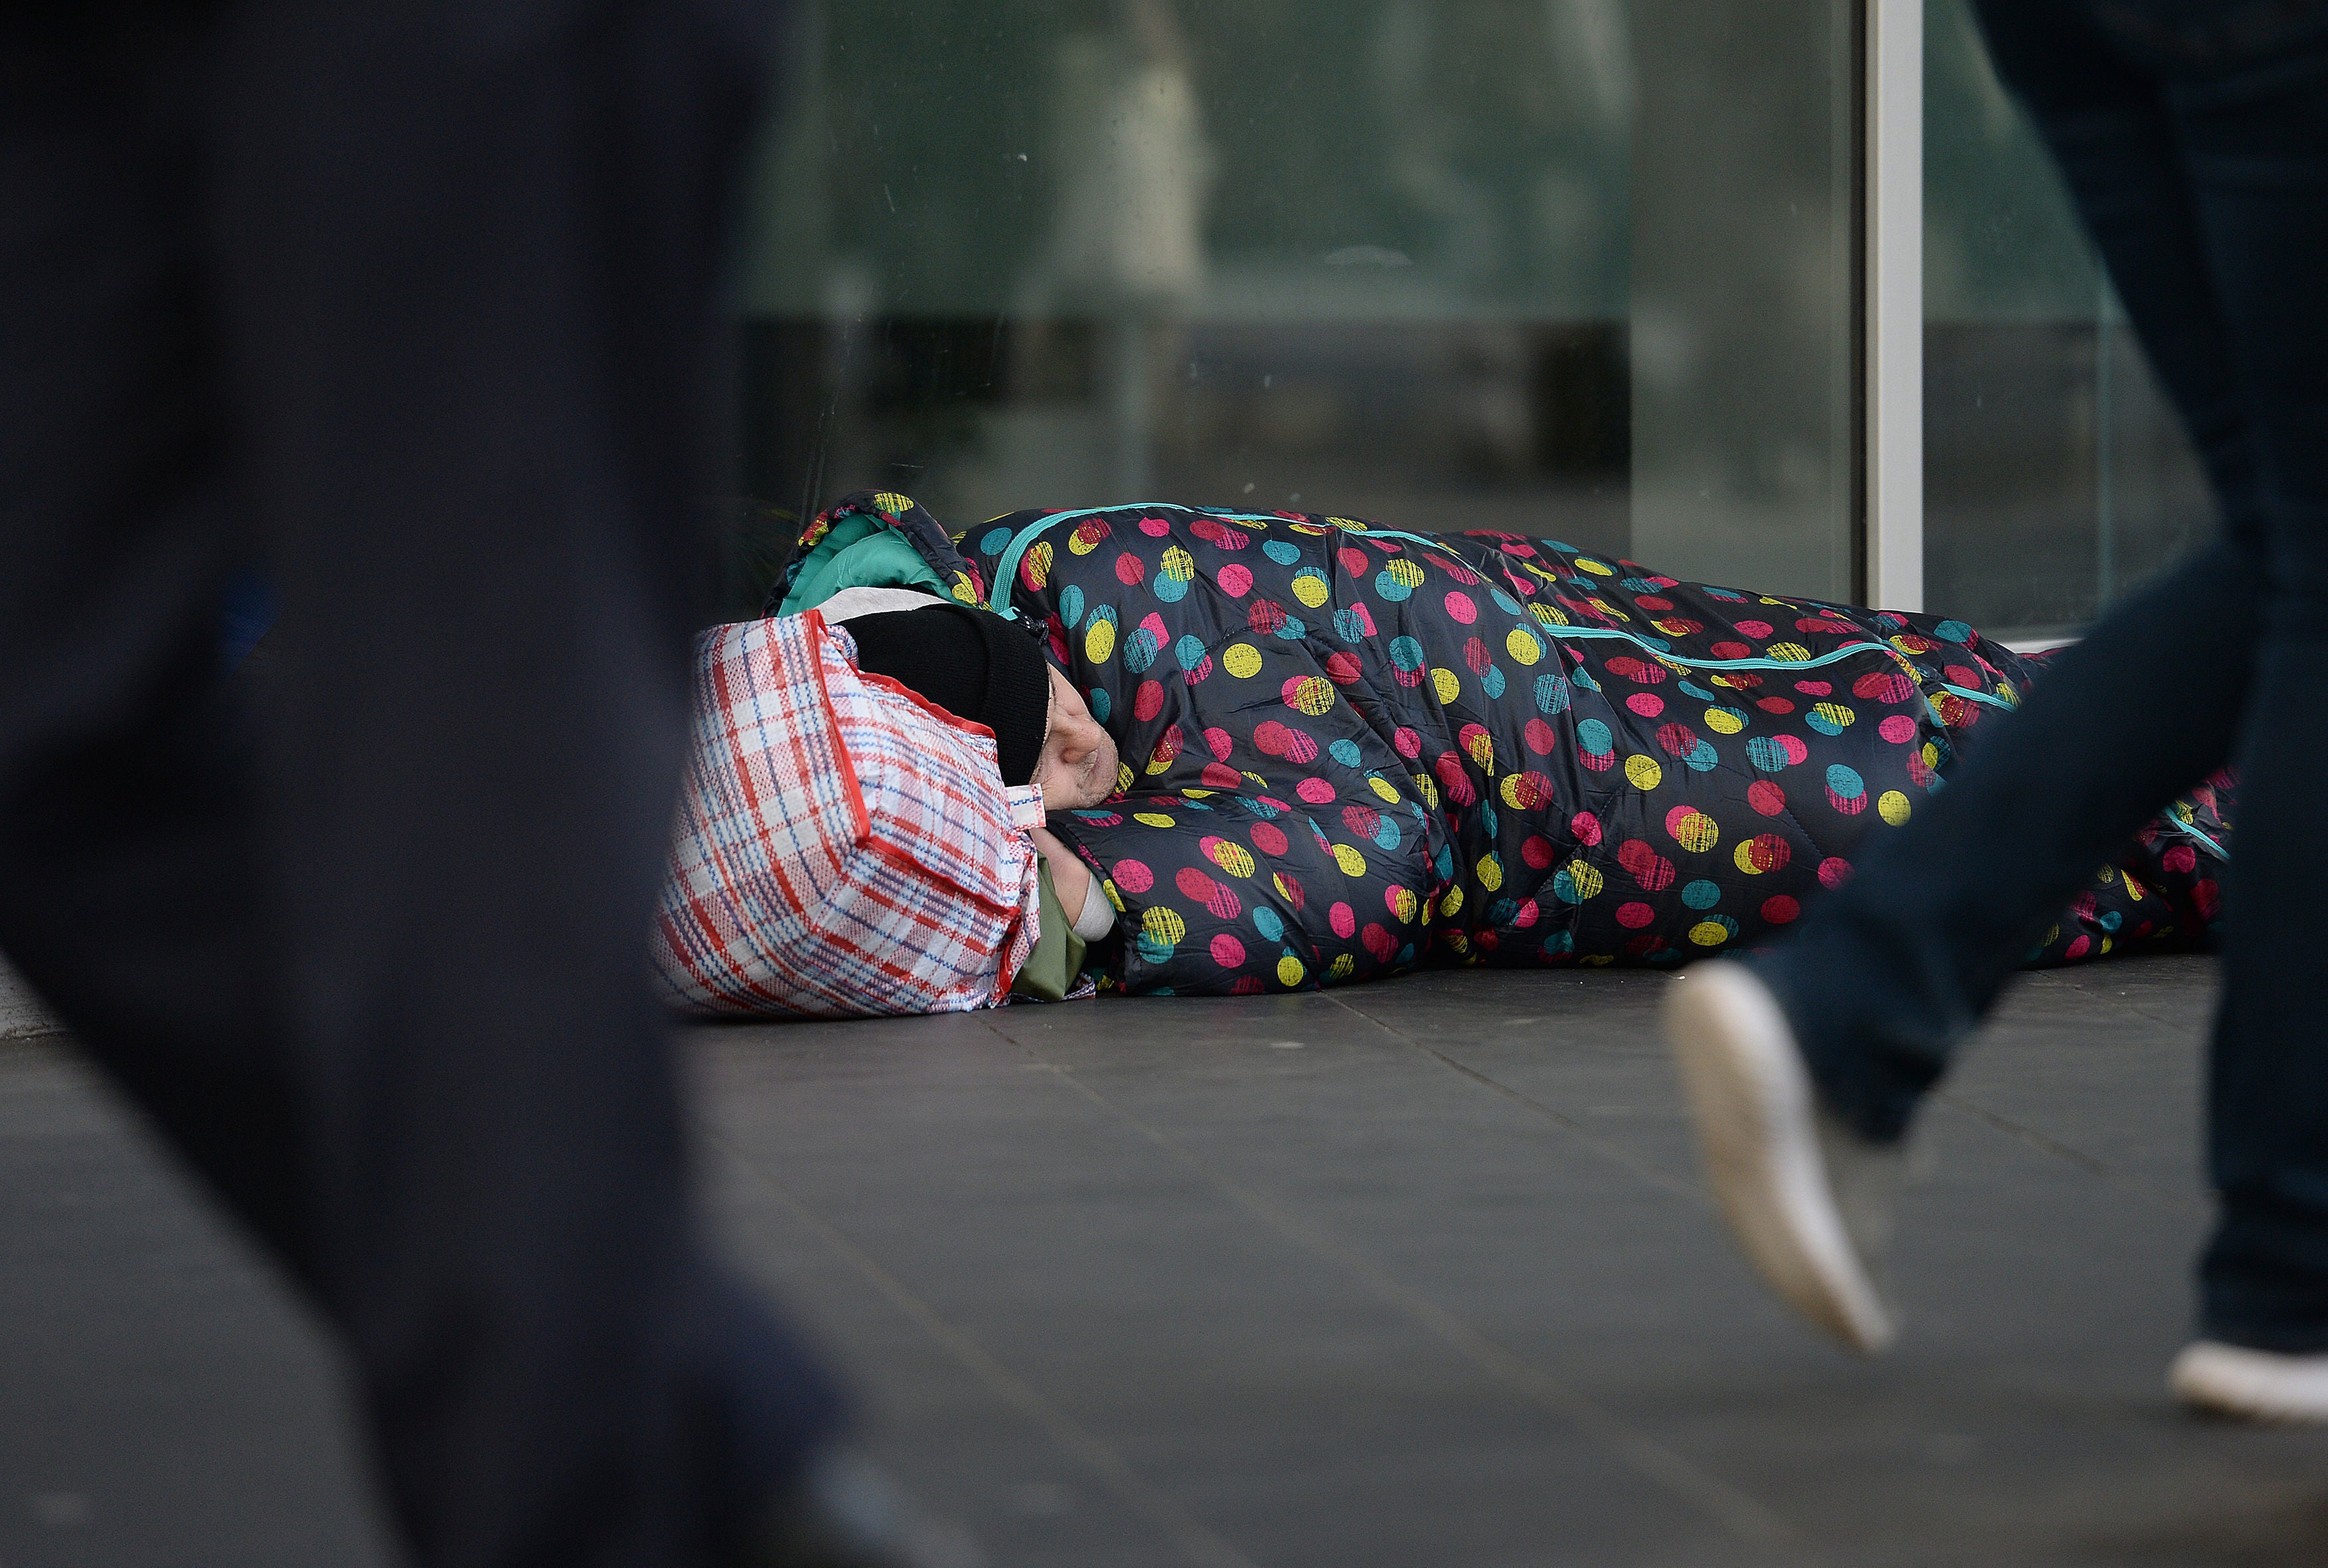 Some councils have reported higher levels of rough sleeping than before the pandemic